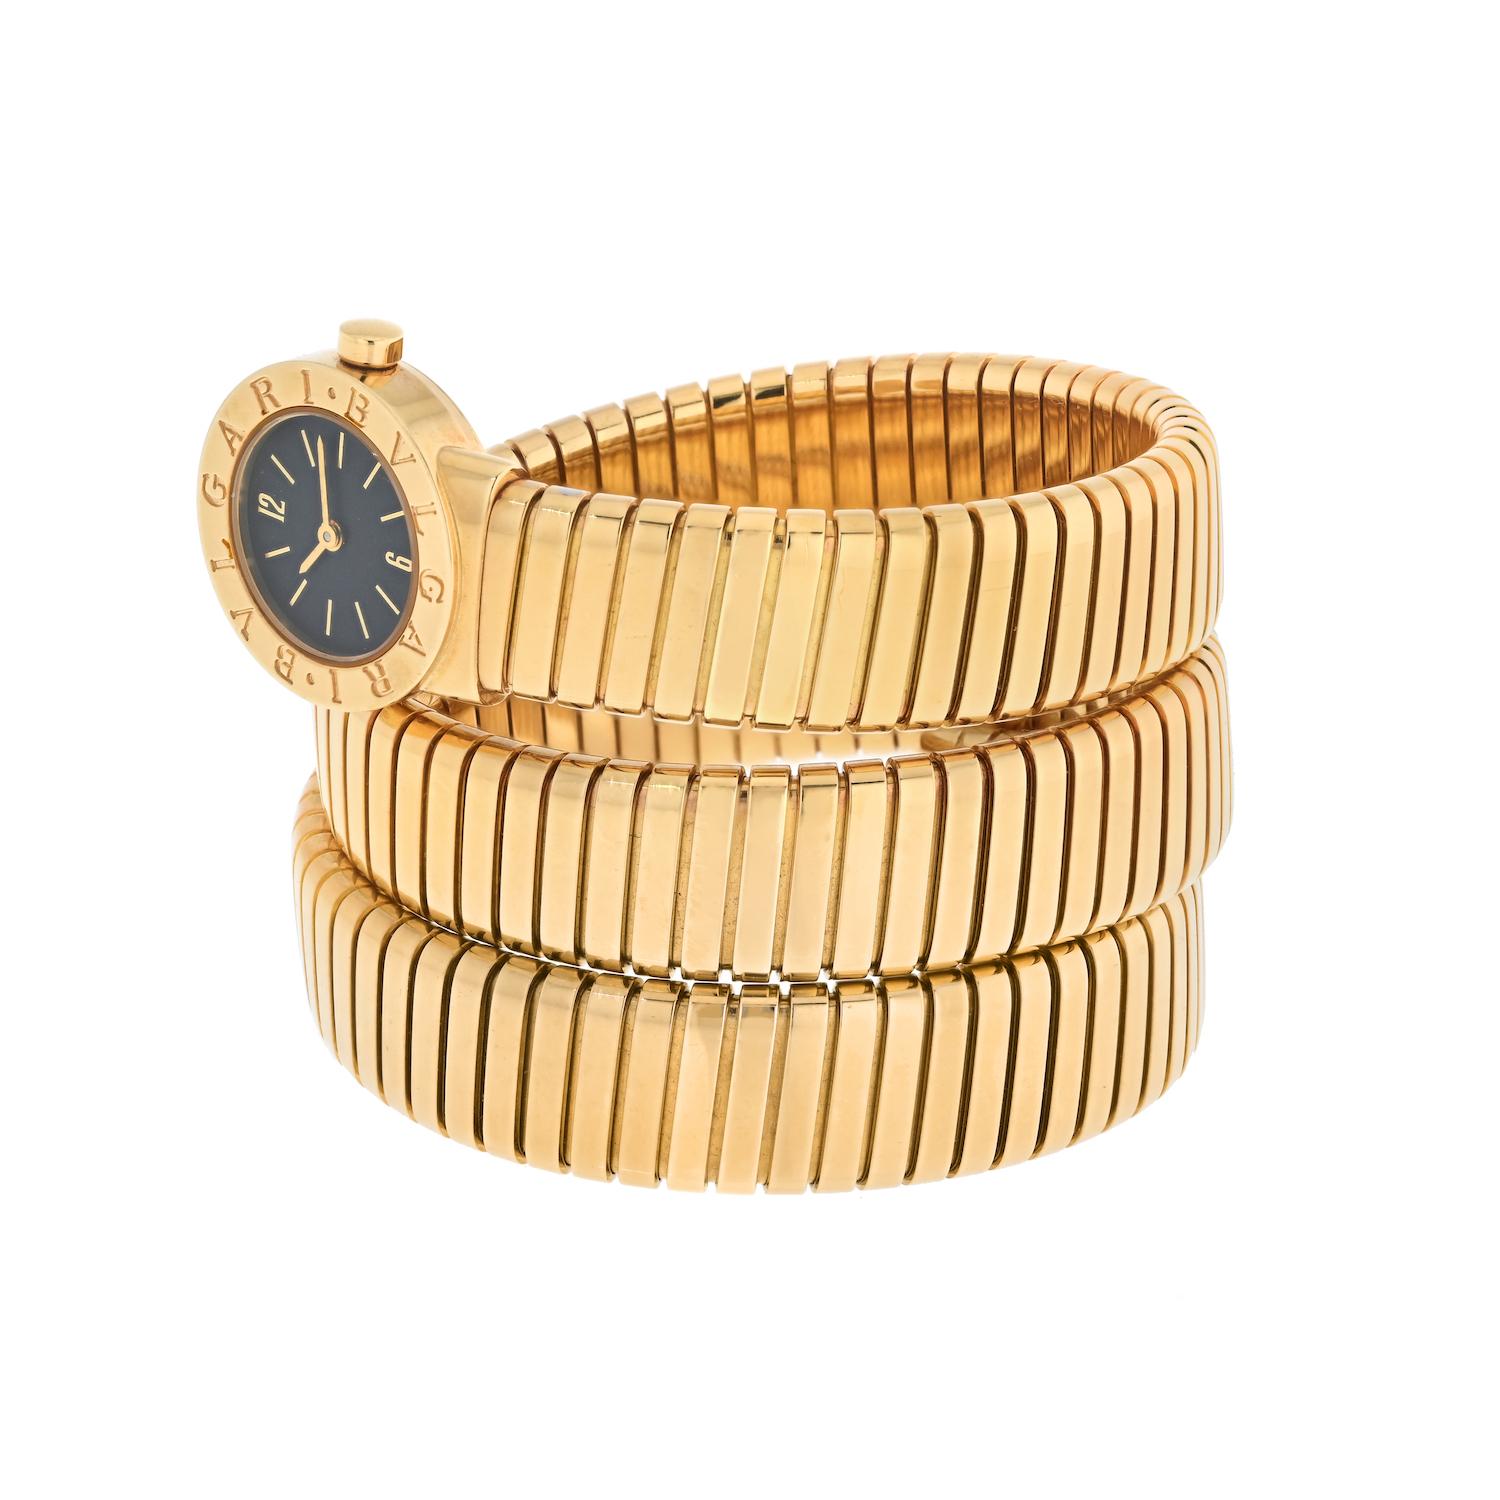 Bvlgari 18K Yellow Gold Serpenti Vintage BB19 1 T Watch.
Bulgari’s Tubogas Snake watch is an internationally recognizable classic. Immaculately crafted from 18K yellow gold, this rare vintage timepiece features a black lacquered dial set in a 19mm